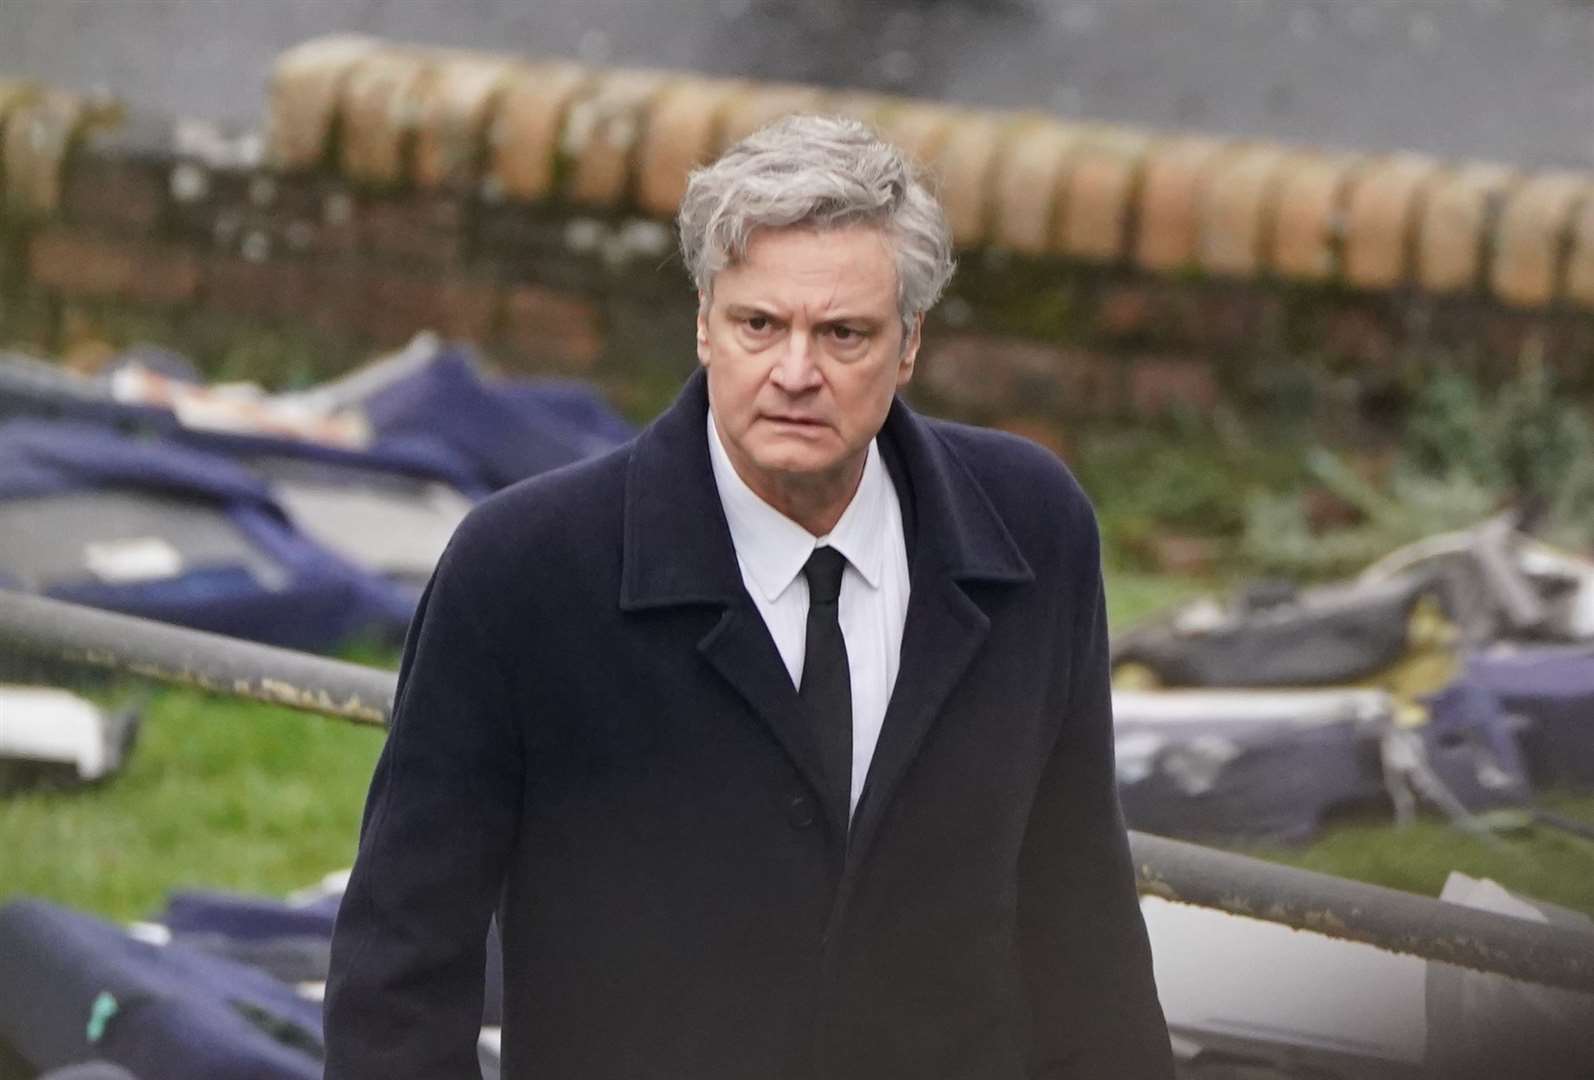 Colin Firth looks troubled as he walks through a scene recreating Lockerbie, following the events of the bombing (Andrew Milligan/PA)